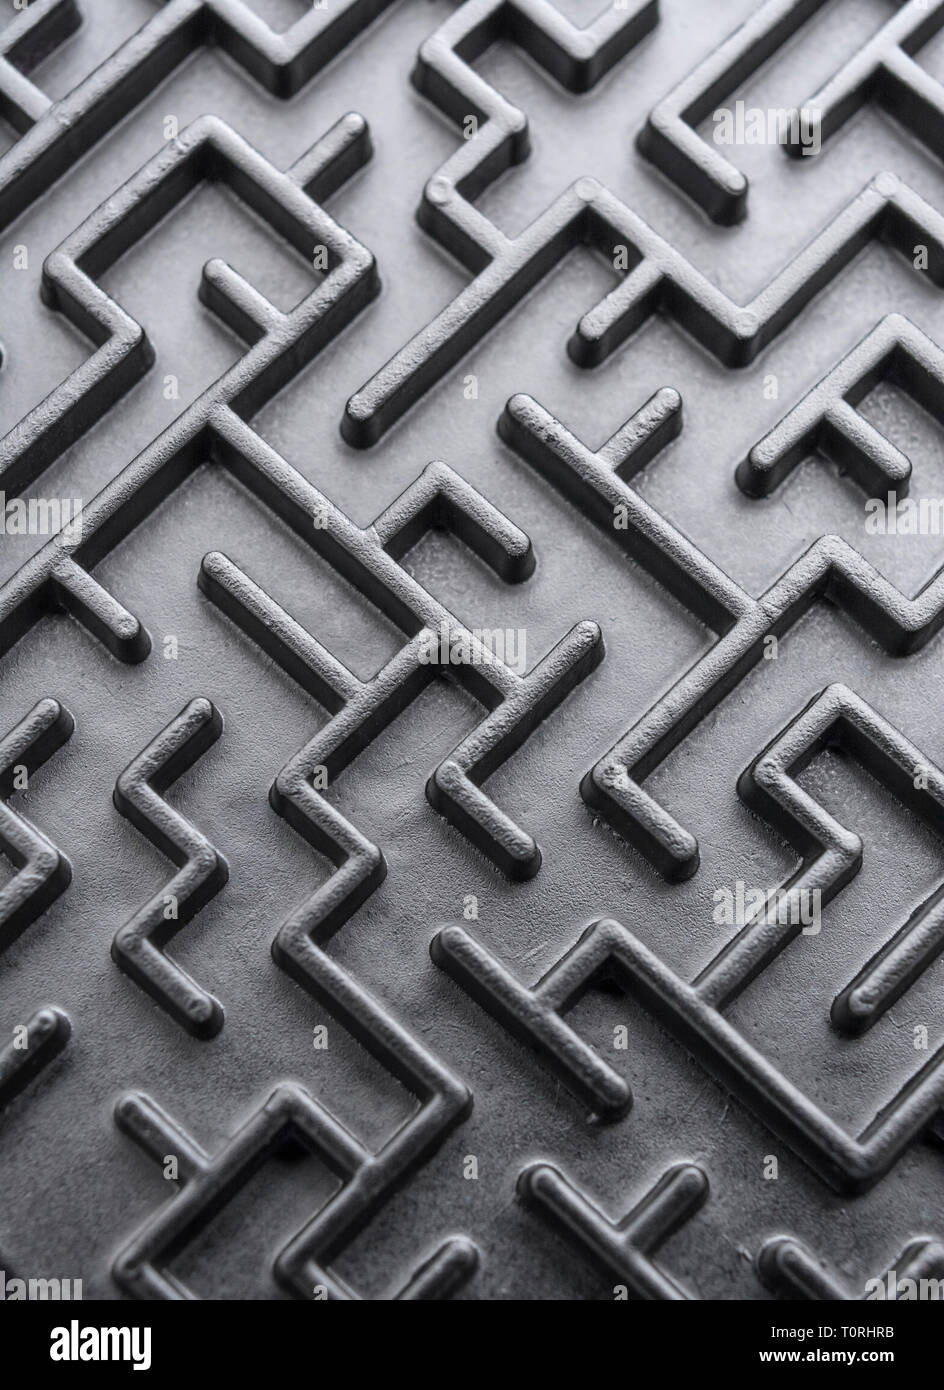 Macro shot of small toy maze painted black. For complex, getting lost, navigating, problem solving, unreachable goals, Brexit negotiations talks. Stock Photo